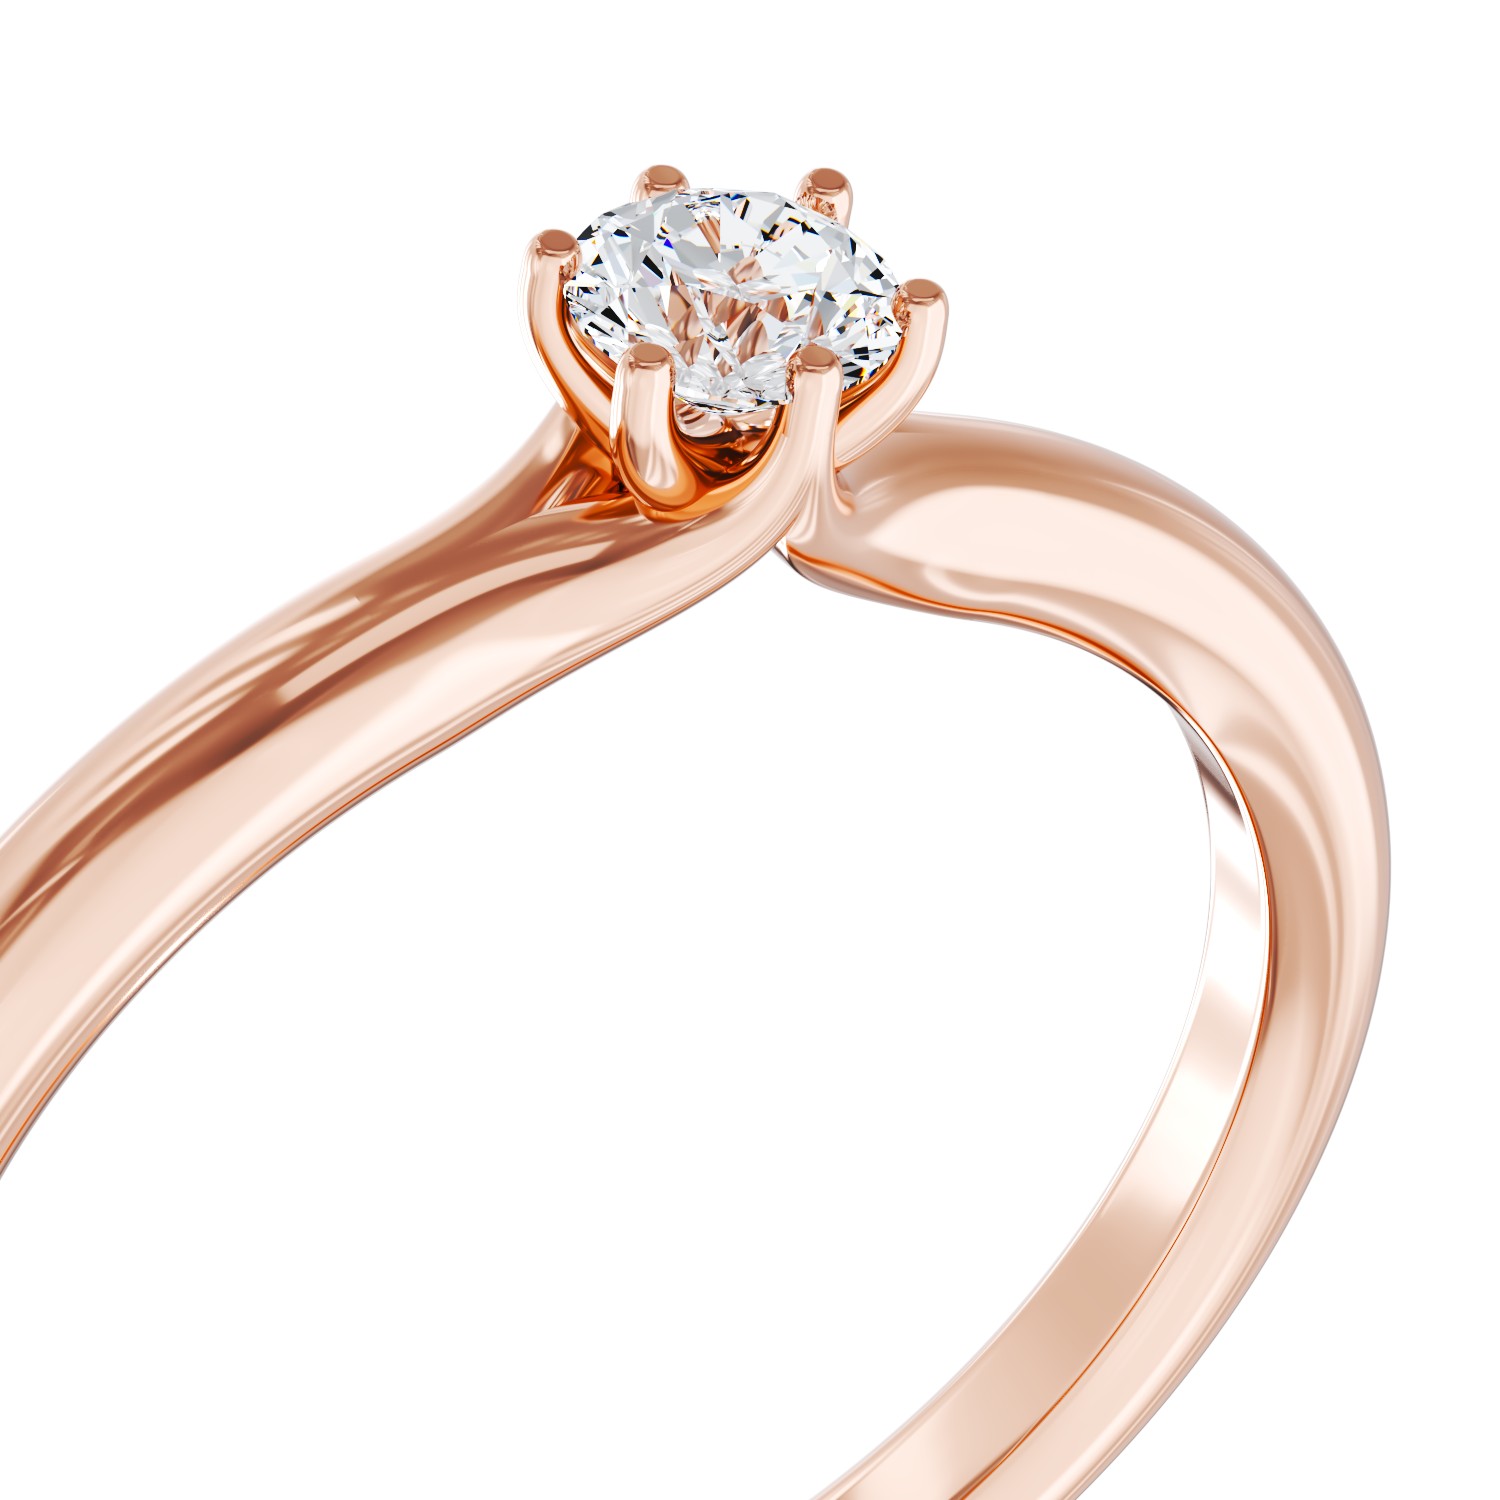 Rose gold engagement ring with 0.163ct solitaire diamond